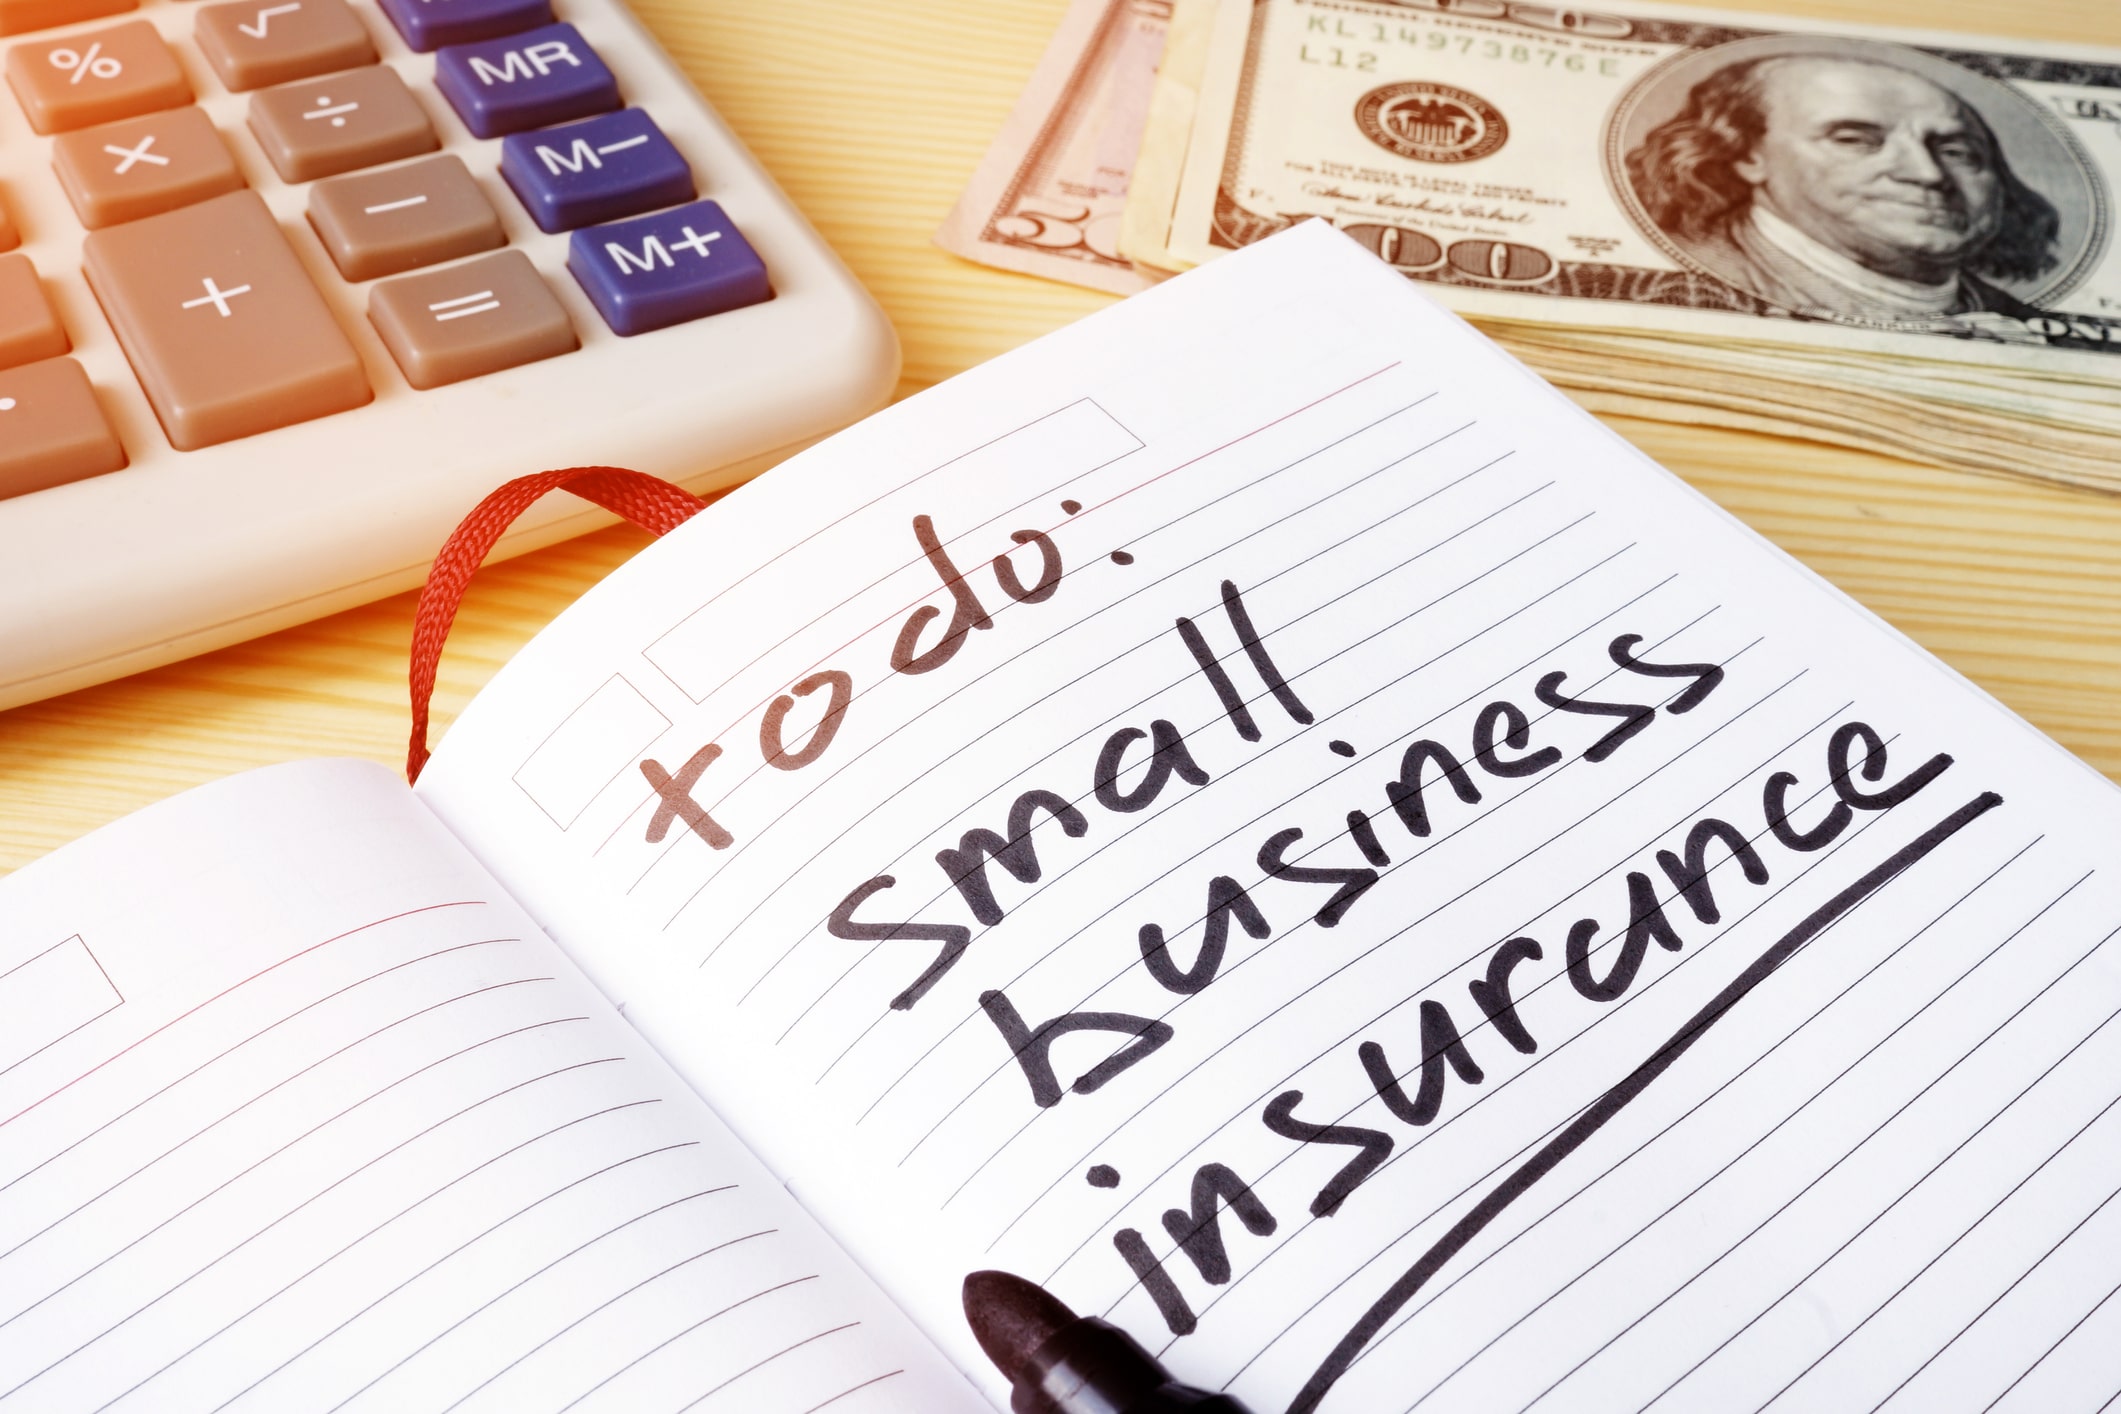 Insurance small businesses need - My Own Business Institute - Learn How To  Start a Business